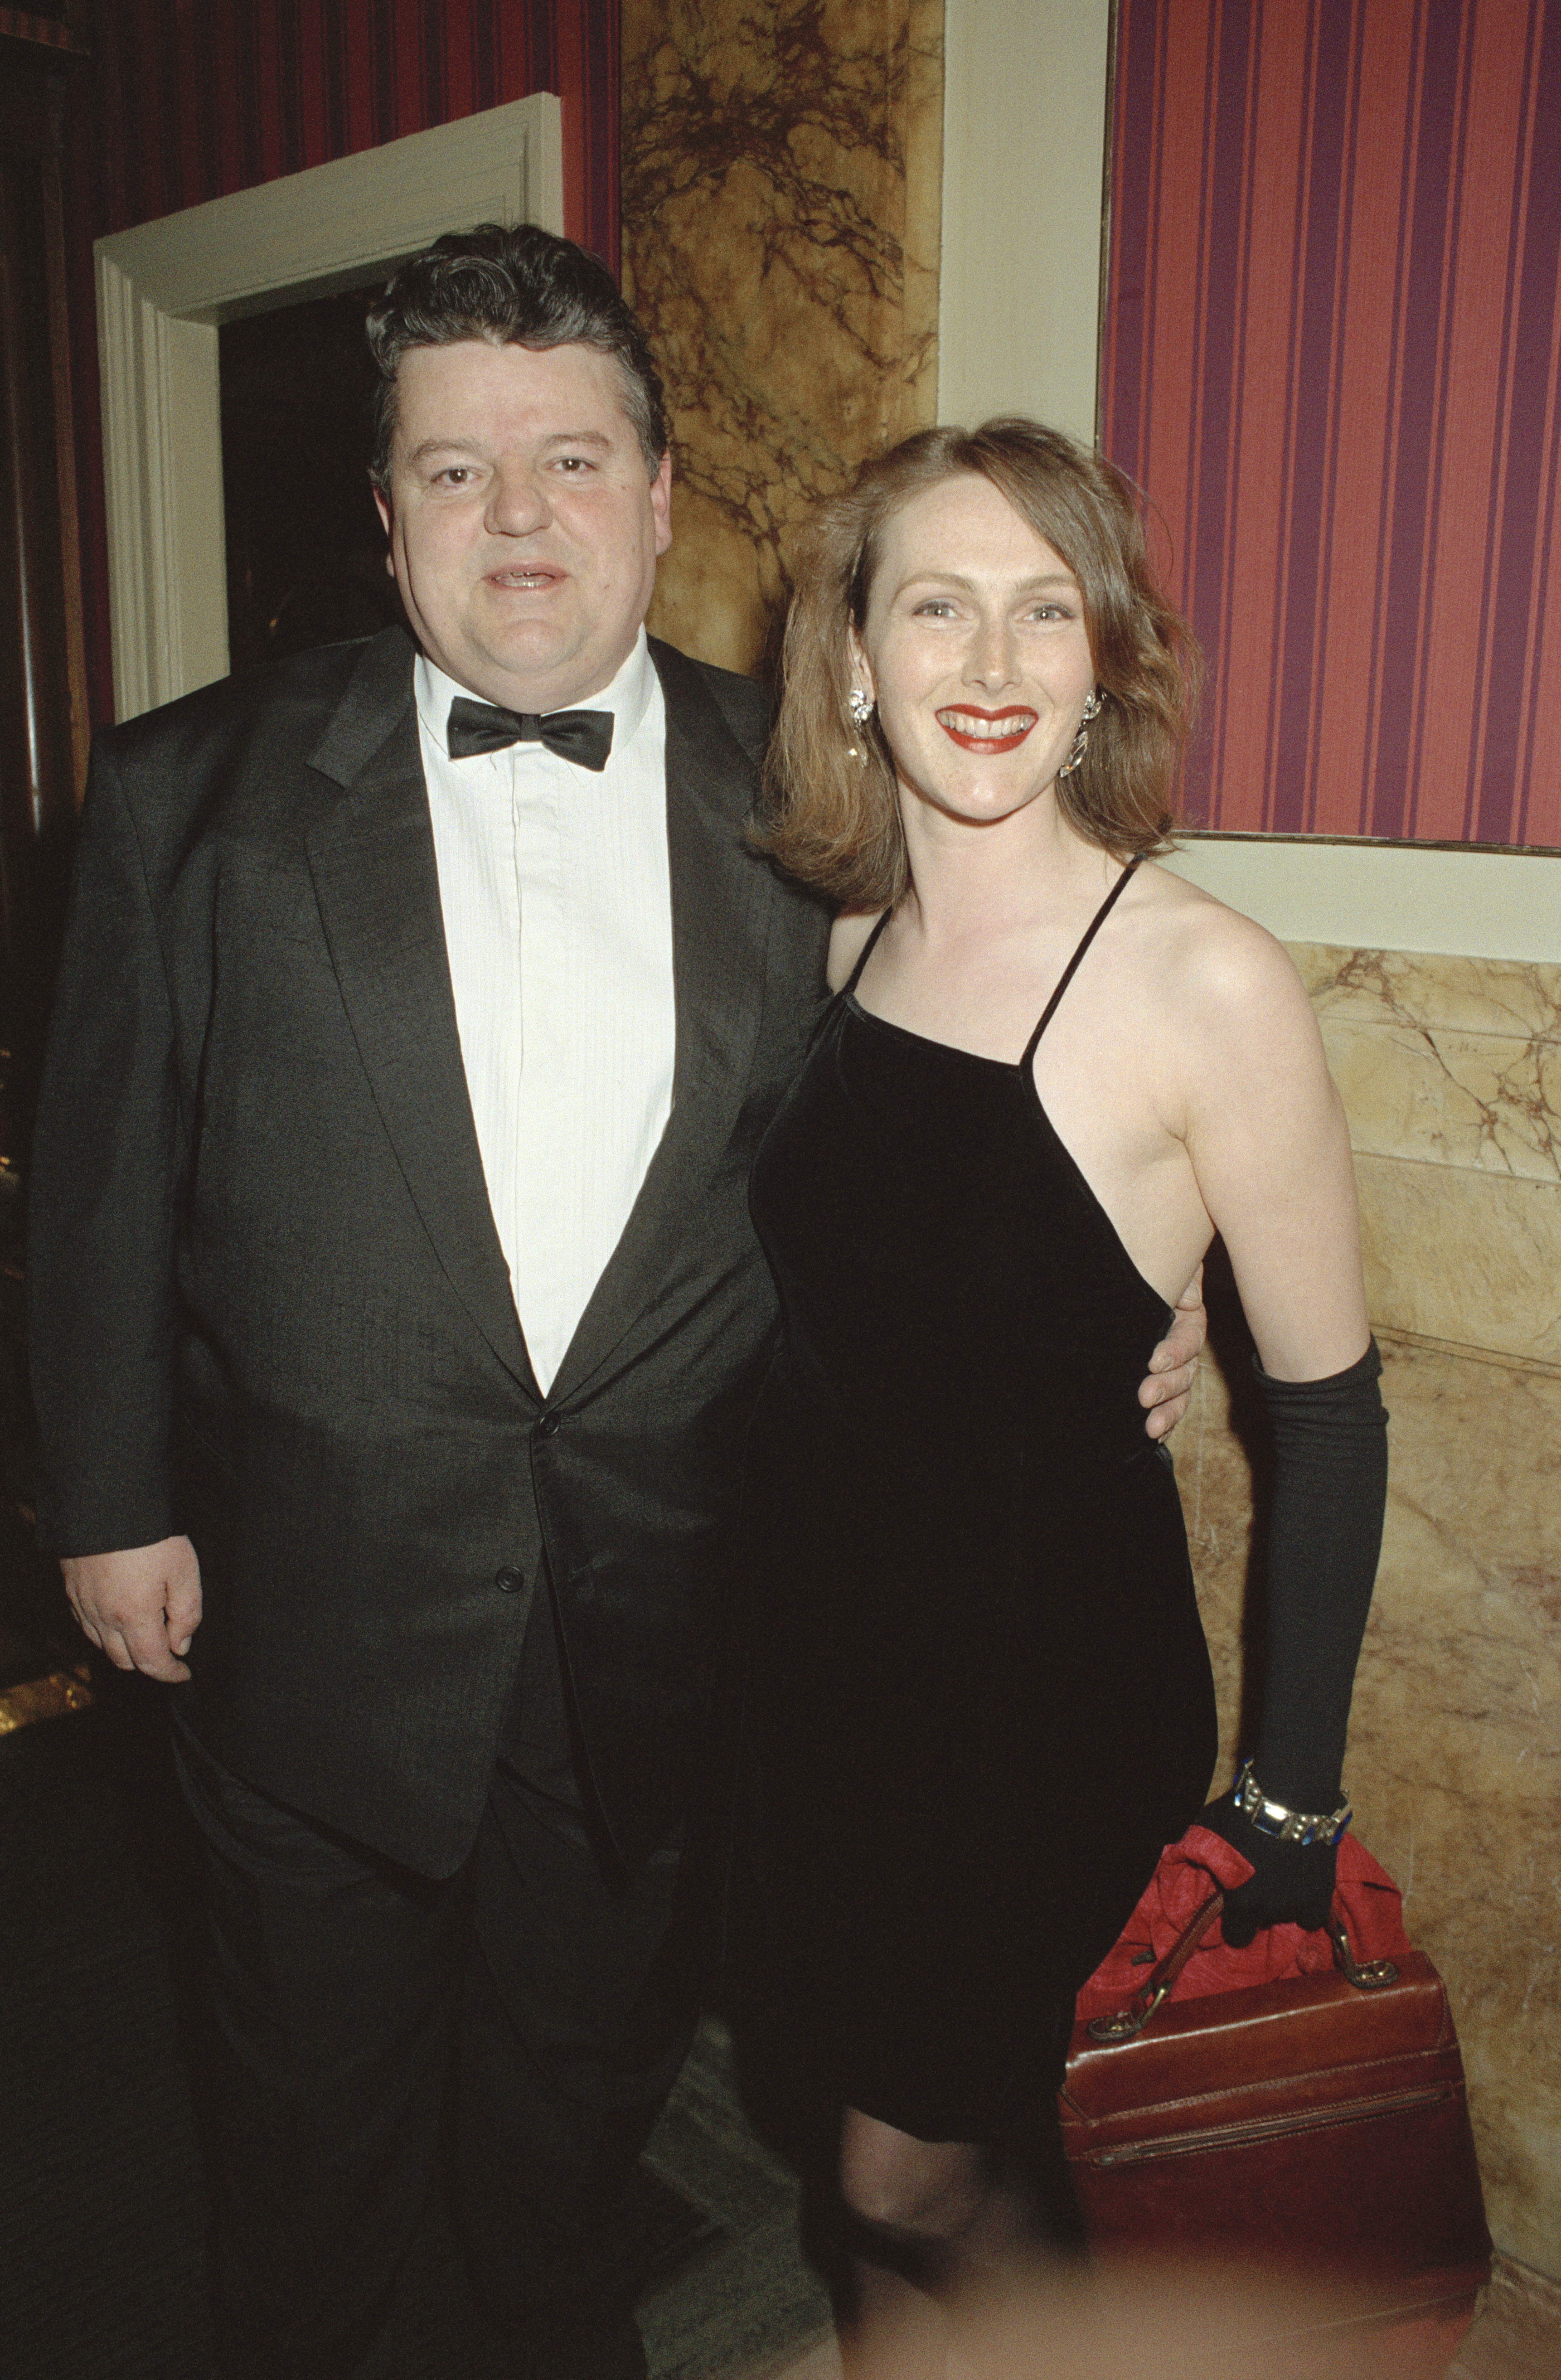 Robbie Coltrane and Rhona Gemmell are photographed at The BAFTA Awards at the London Palladium on April 24, 1995, in London, England | Source: Getty Images